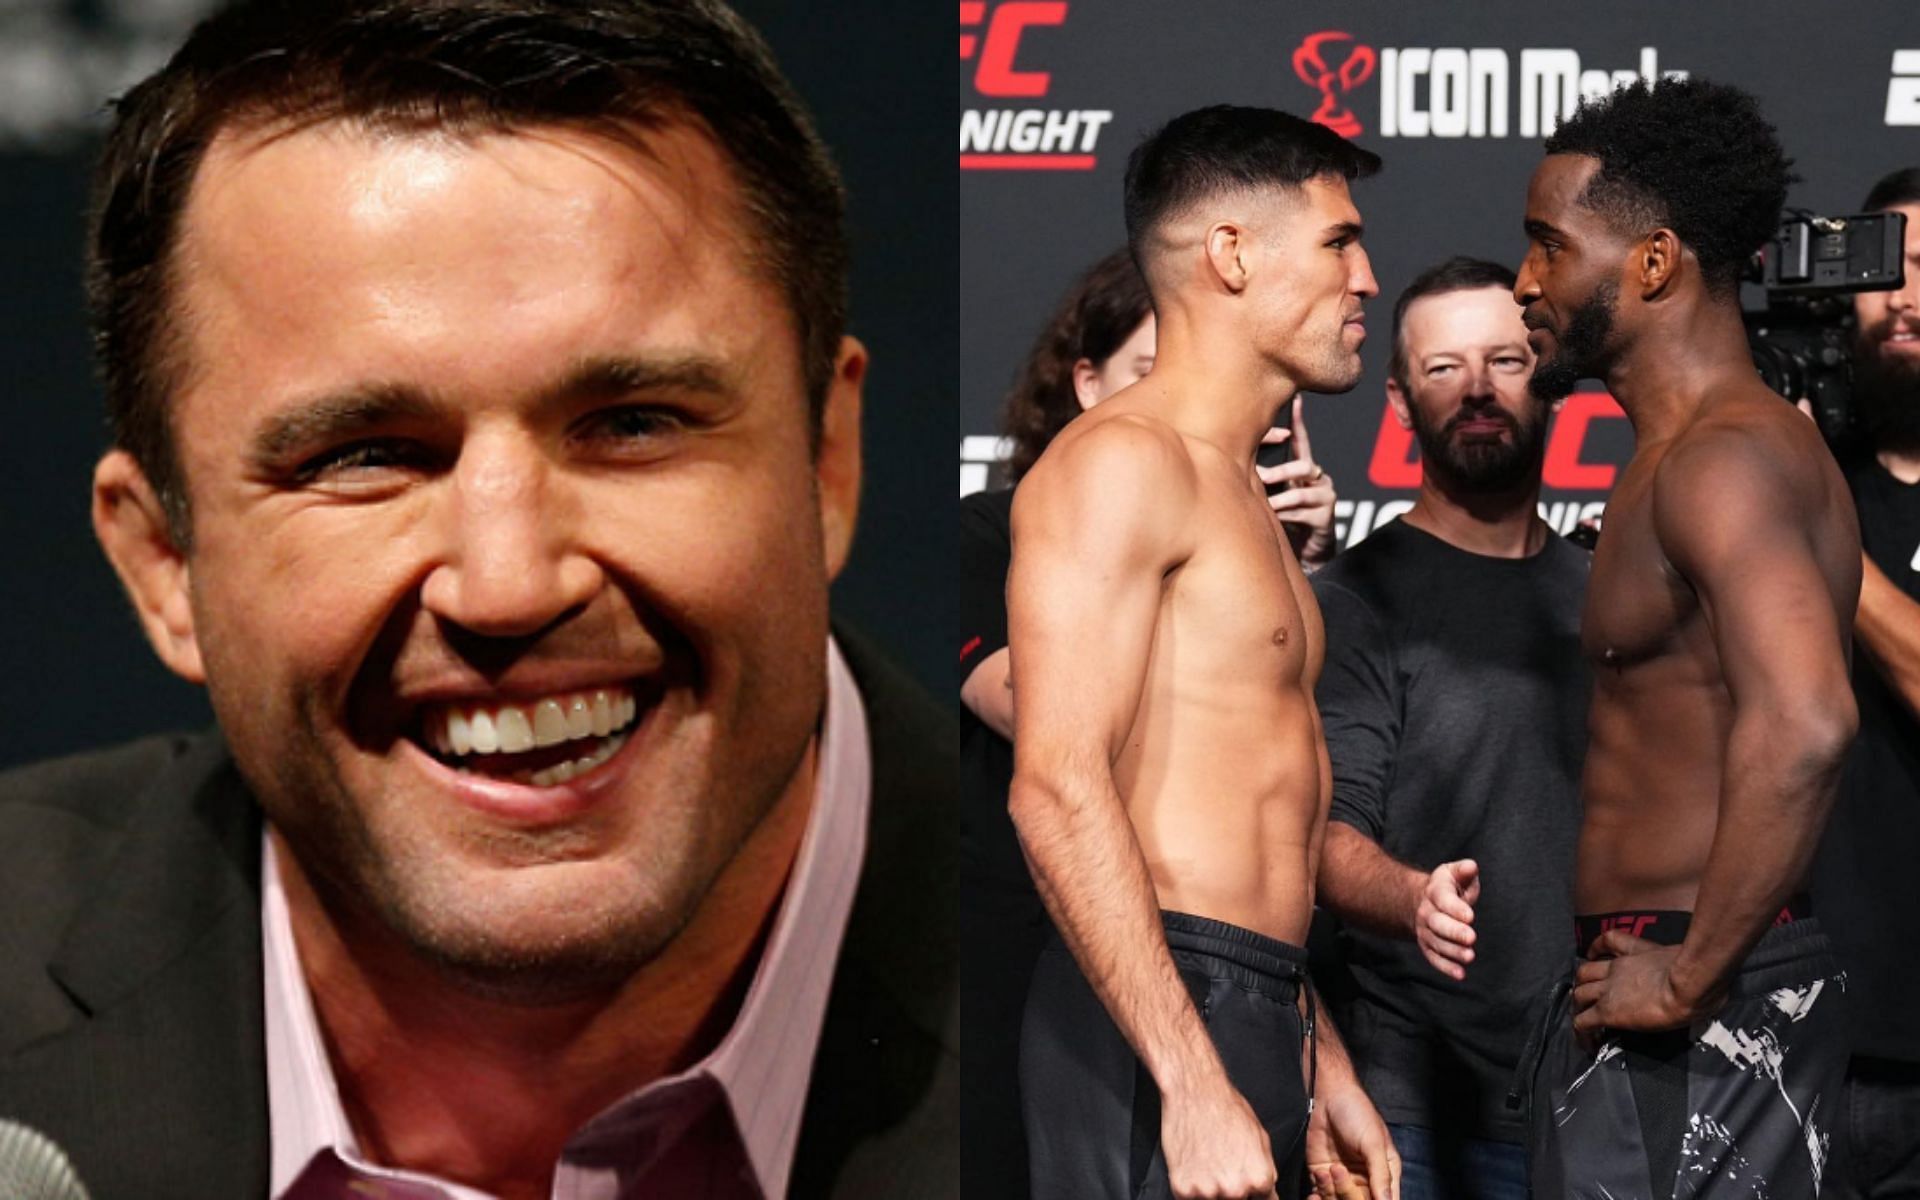 Chael Sonnen (left. Image credit: UFC.com), Vicente Luque vs. Geoff Neal (right. Image credit: @luquevicente on Instagram)